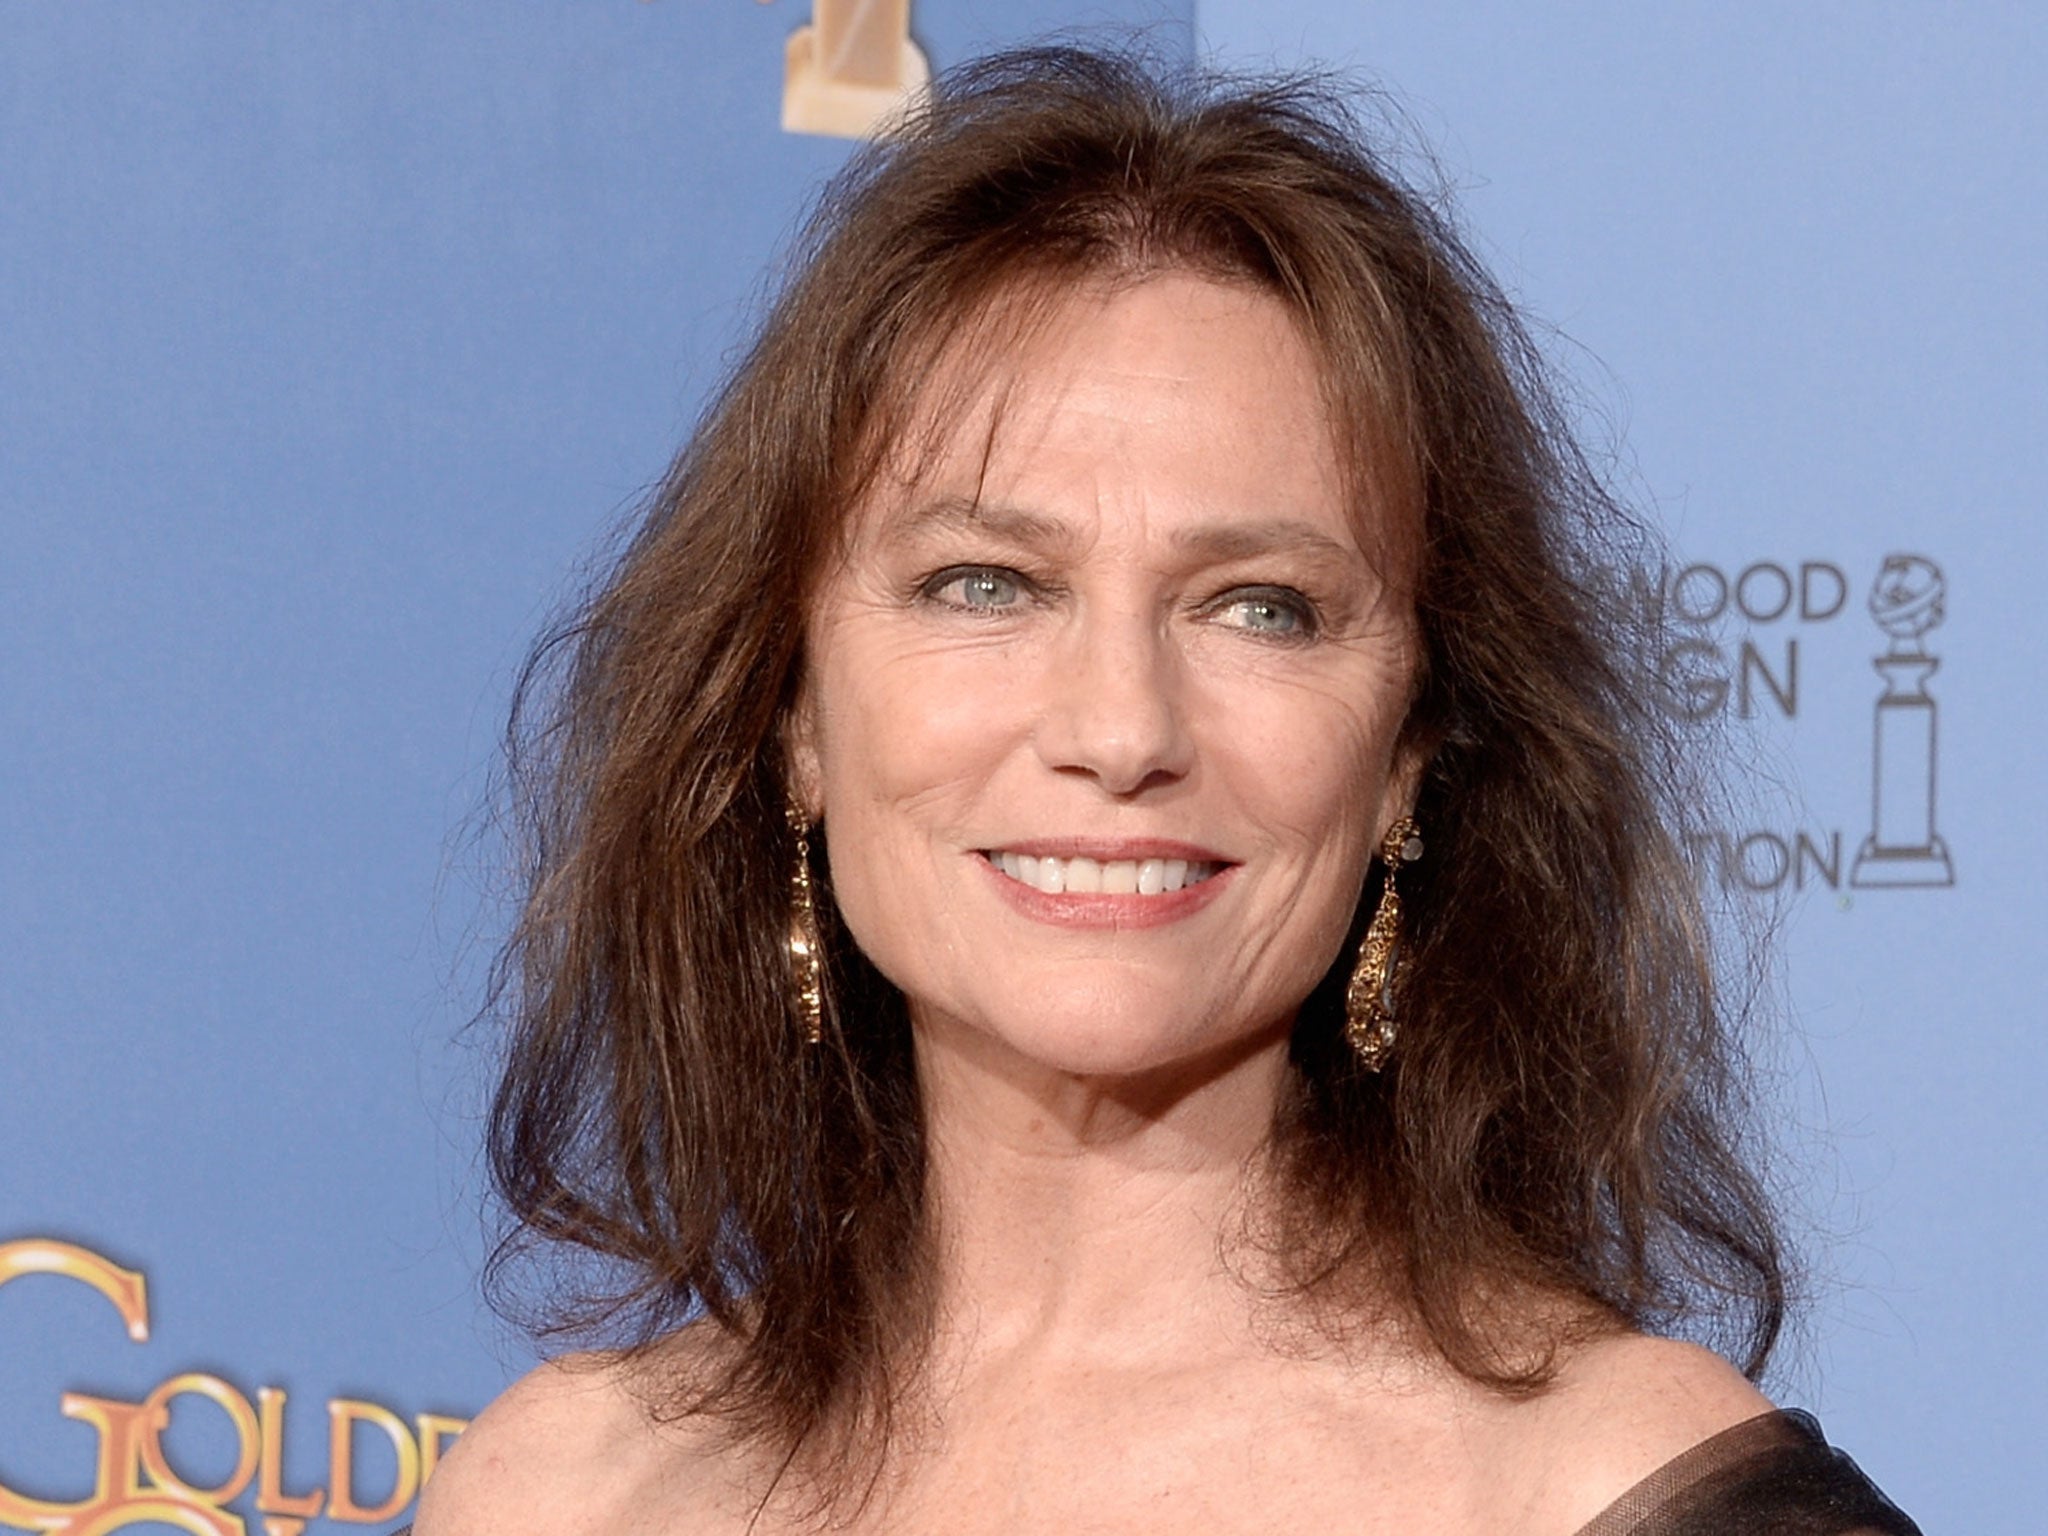 Jacqueline Bisset at the 71st Annual Golden Globe Awards in January